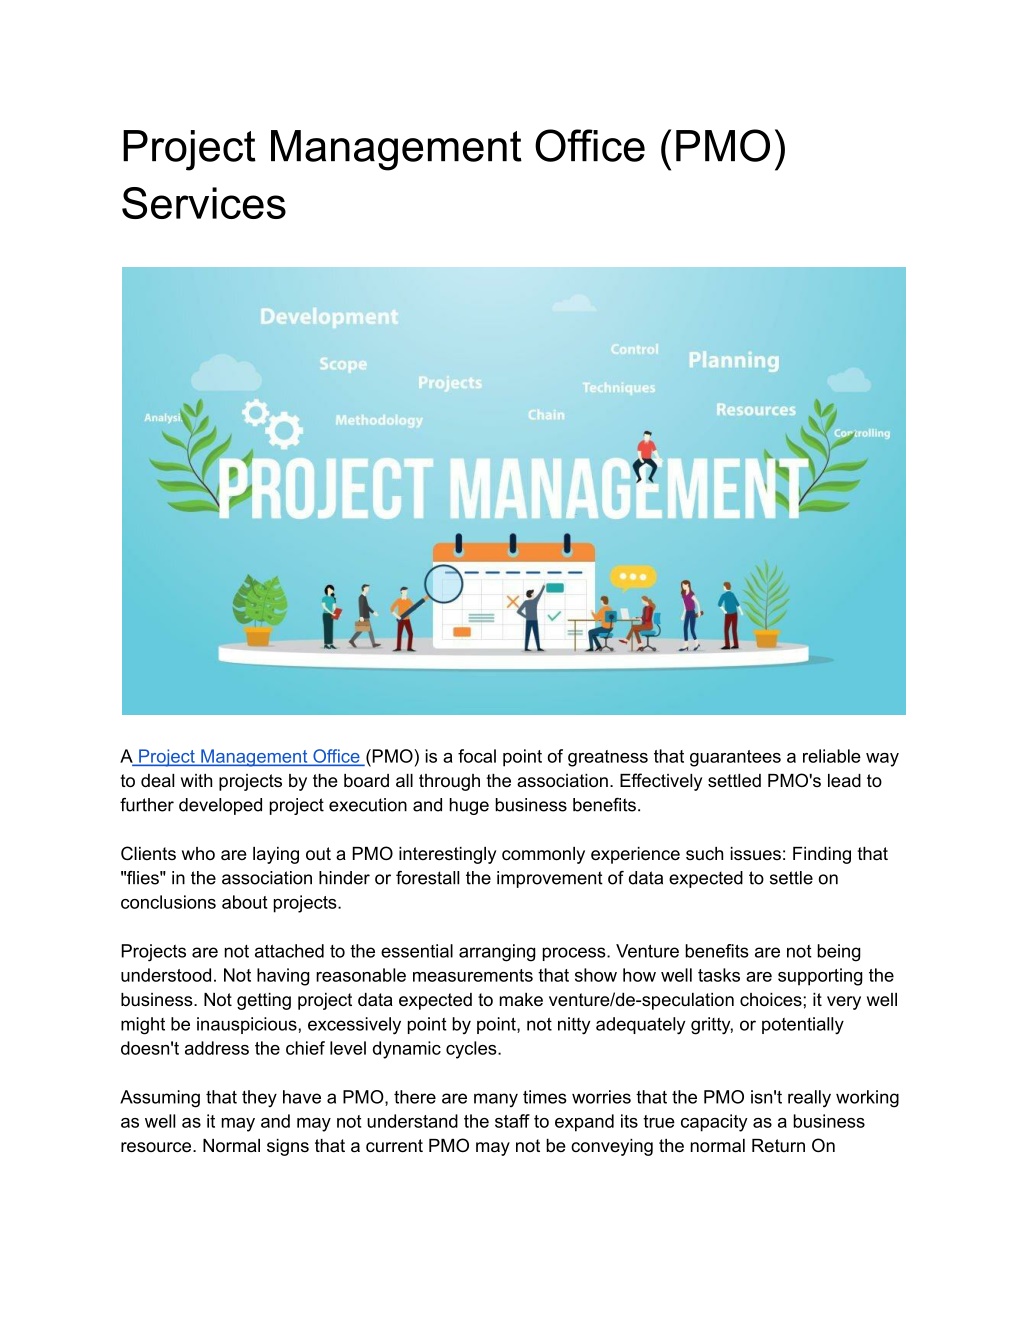 PPT - Project Management Office (PMO) Services PowerPoint Presentation -  ID:11500681